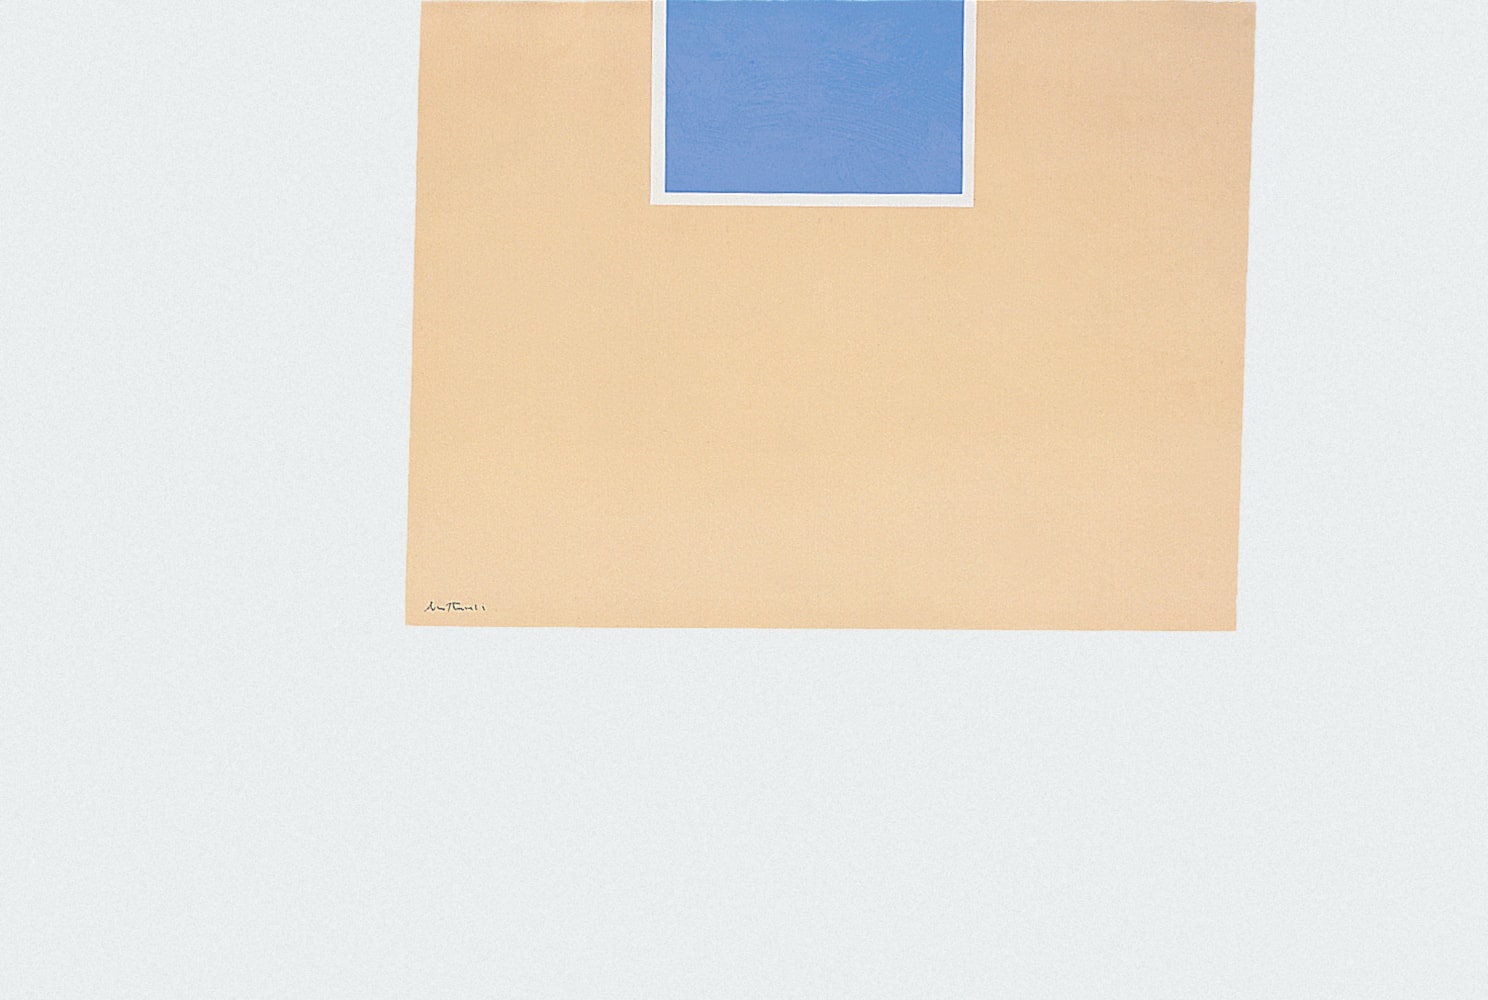 London Series II: Untitled (Blue/Tan), 1971

screenprint on white J.B. Green mould-made Double Elephant paper, edition of 150

28 1/2 x 41 in. / 71.8 x 104.1 cm